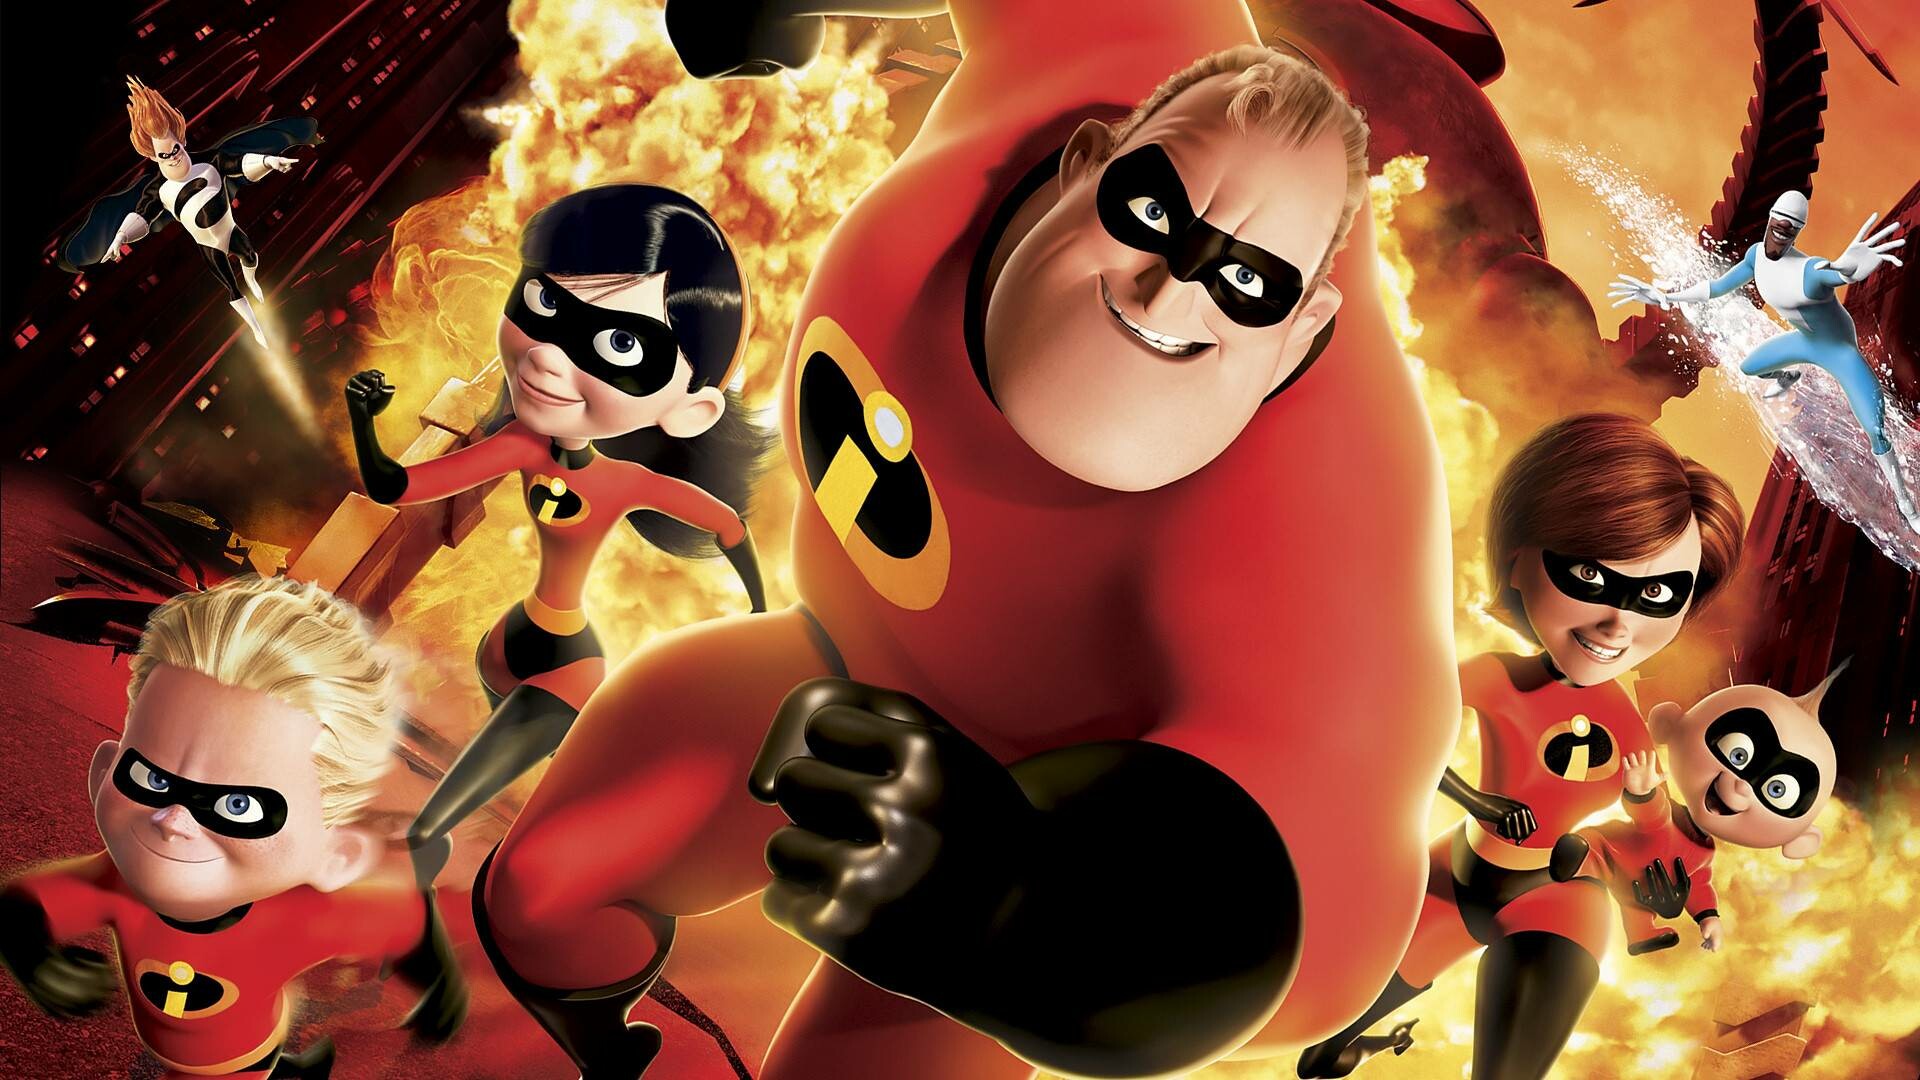 The Incredibles: Considered to be one of the greatest superhero animated movies of all time. 1920x1080 Full HD Background.